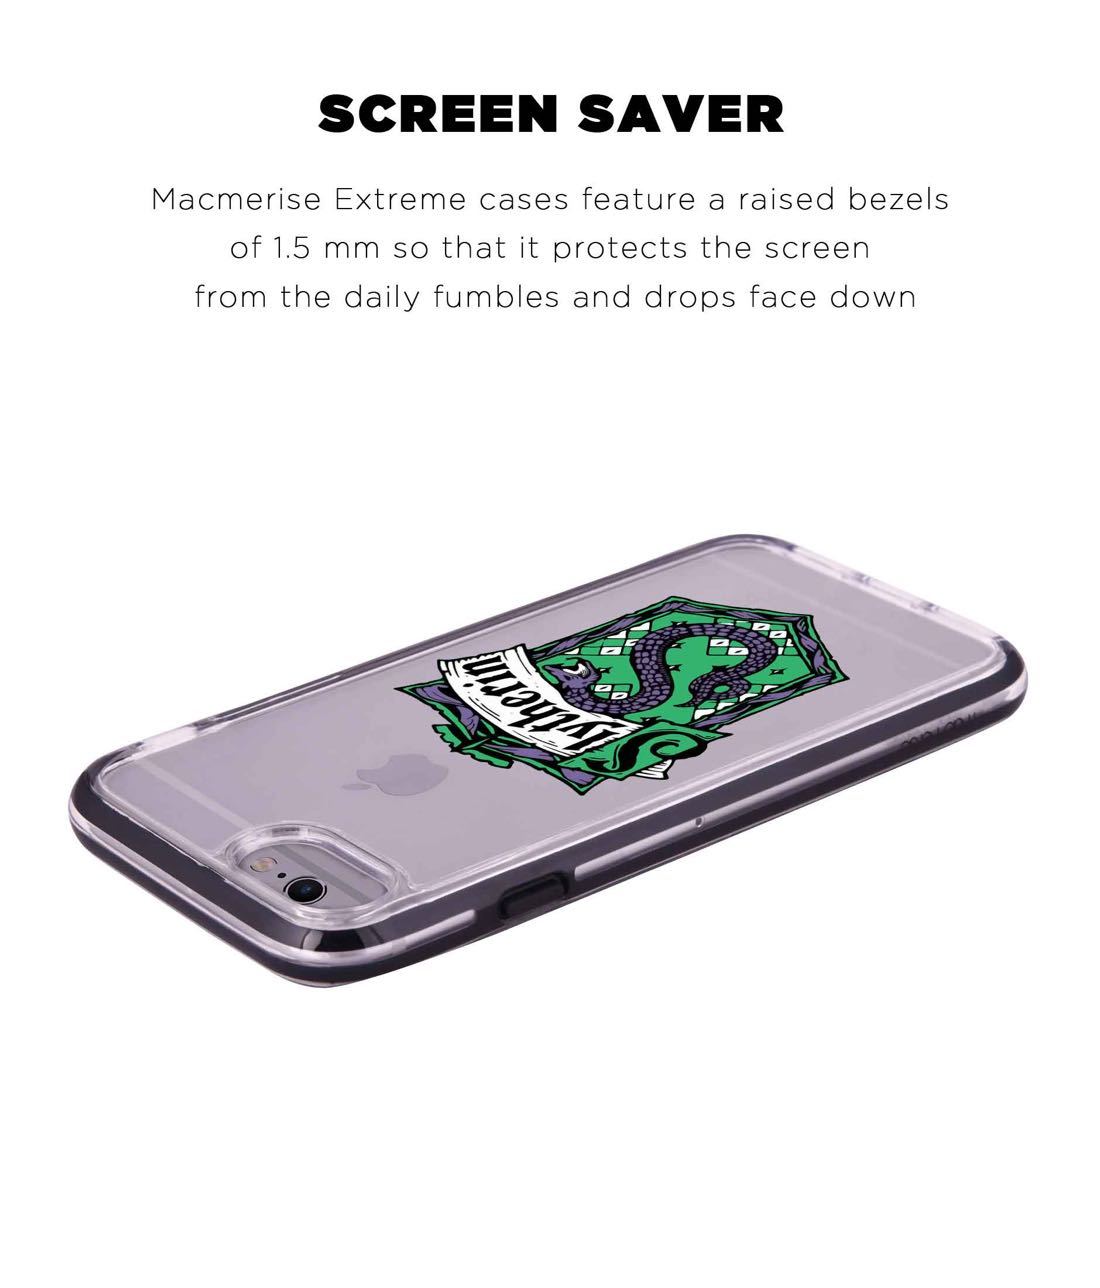 Crest Slytherin - Extreme Phone Case for iPhone 6 Plus